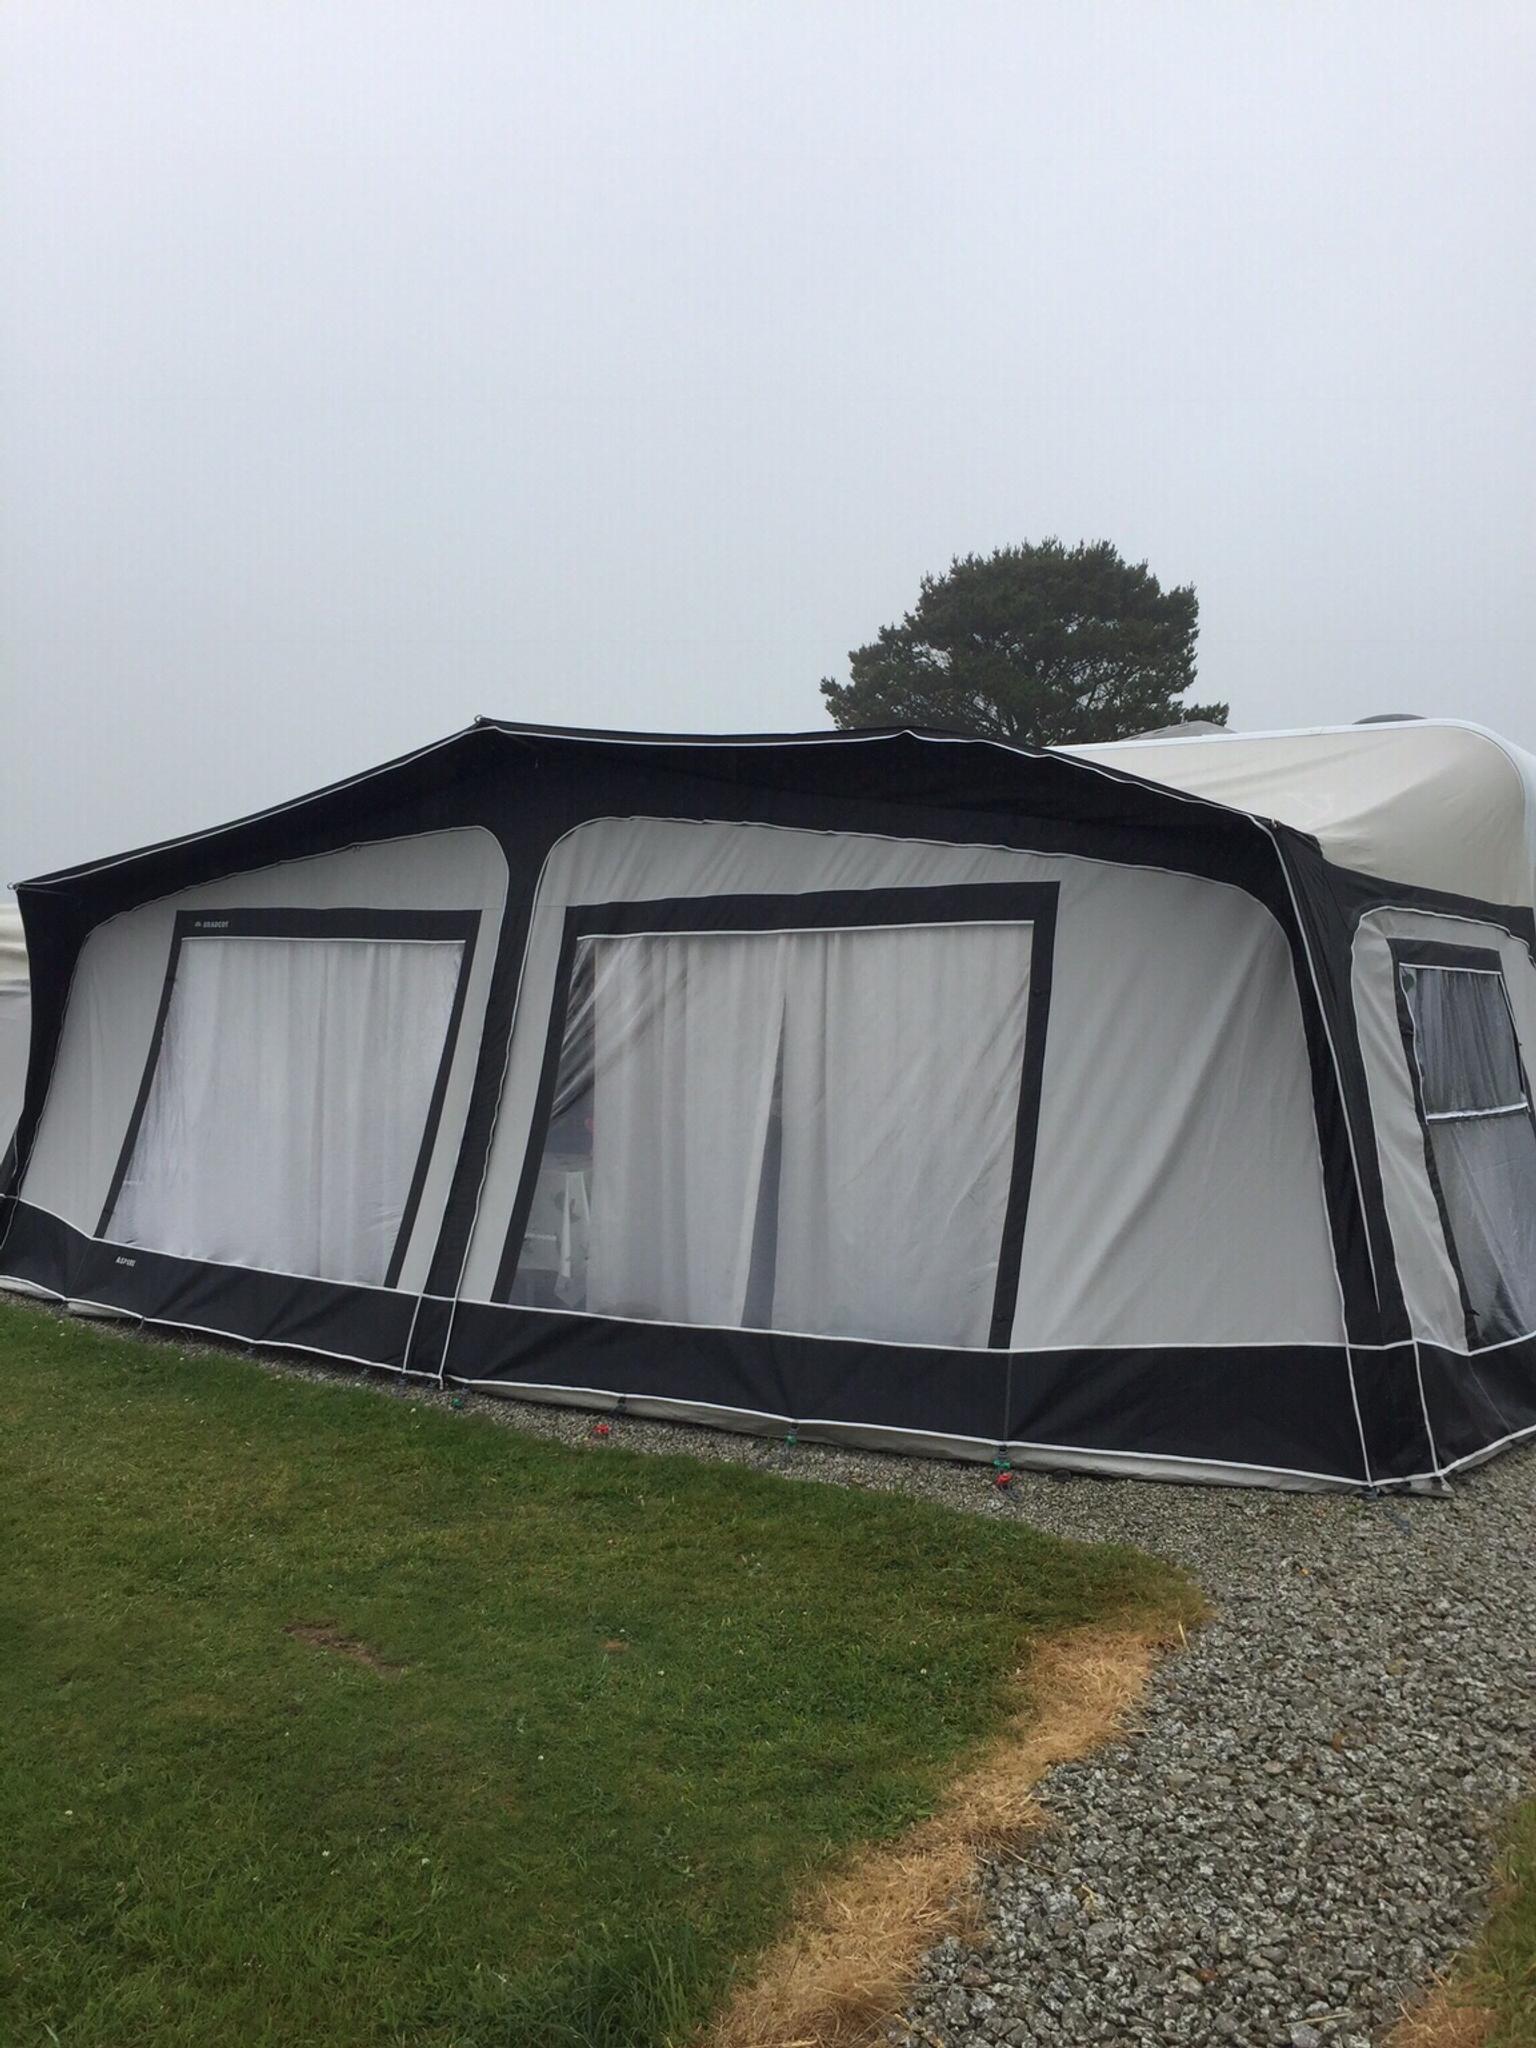 Bradcot Aspire Caravan Awning In Middlewich For 550 00 For Sale Shpock